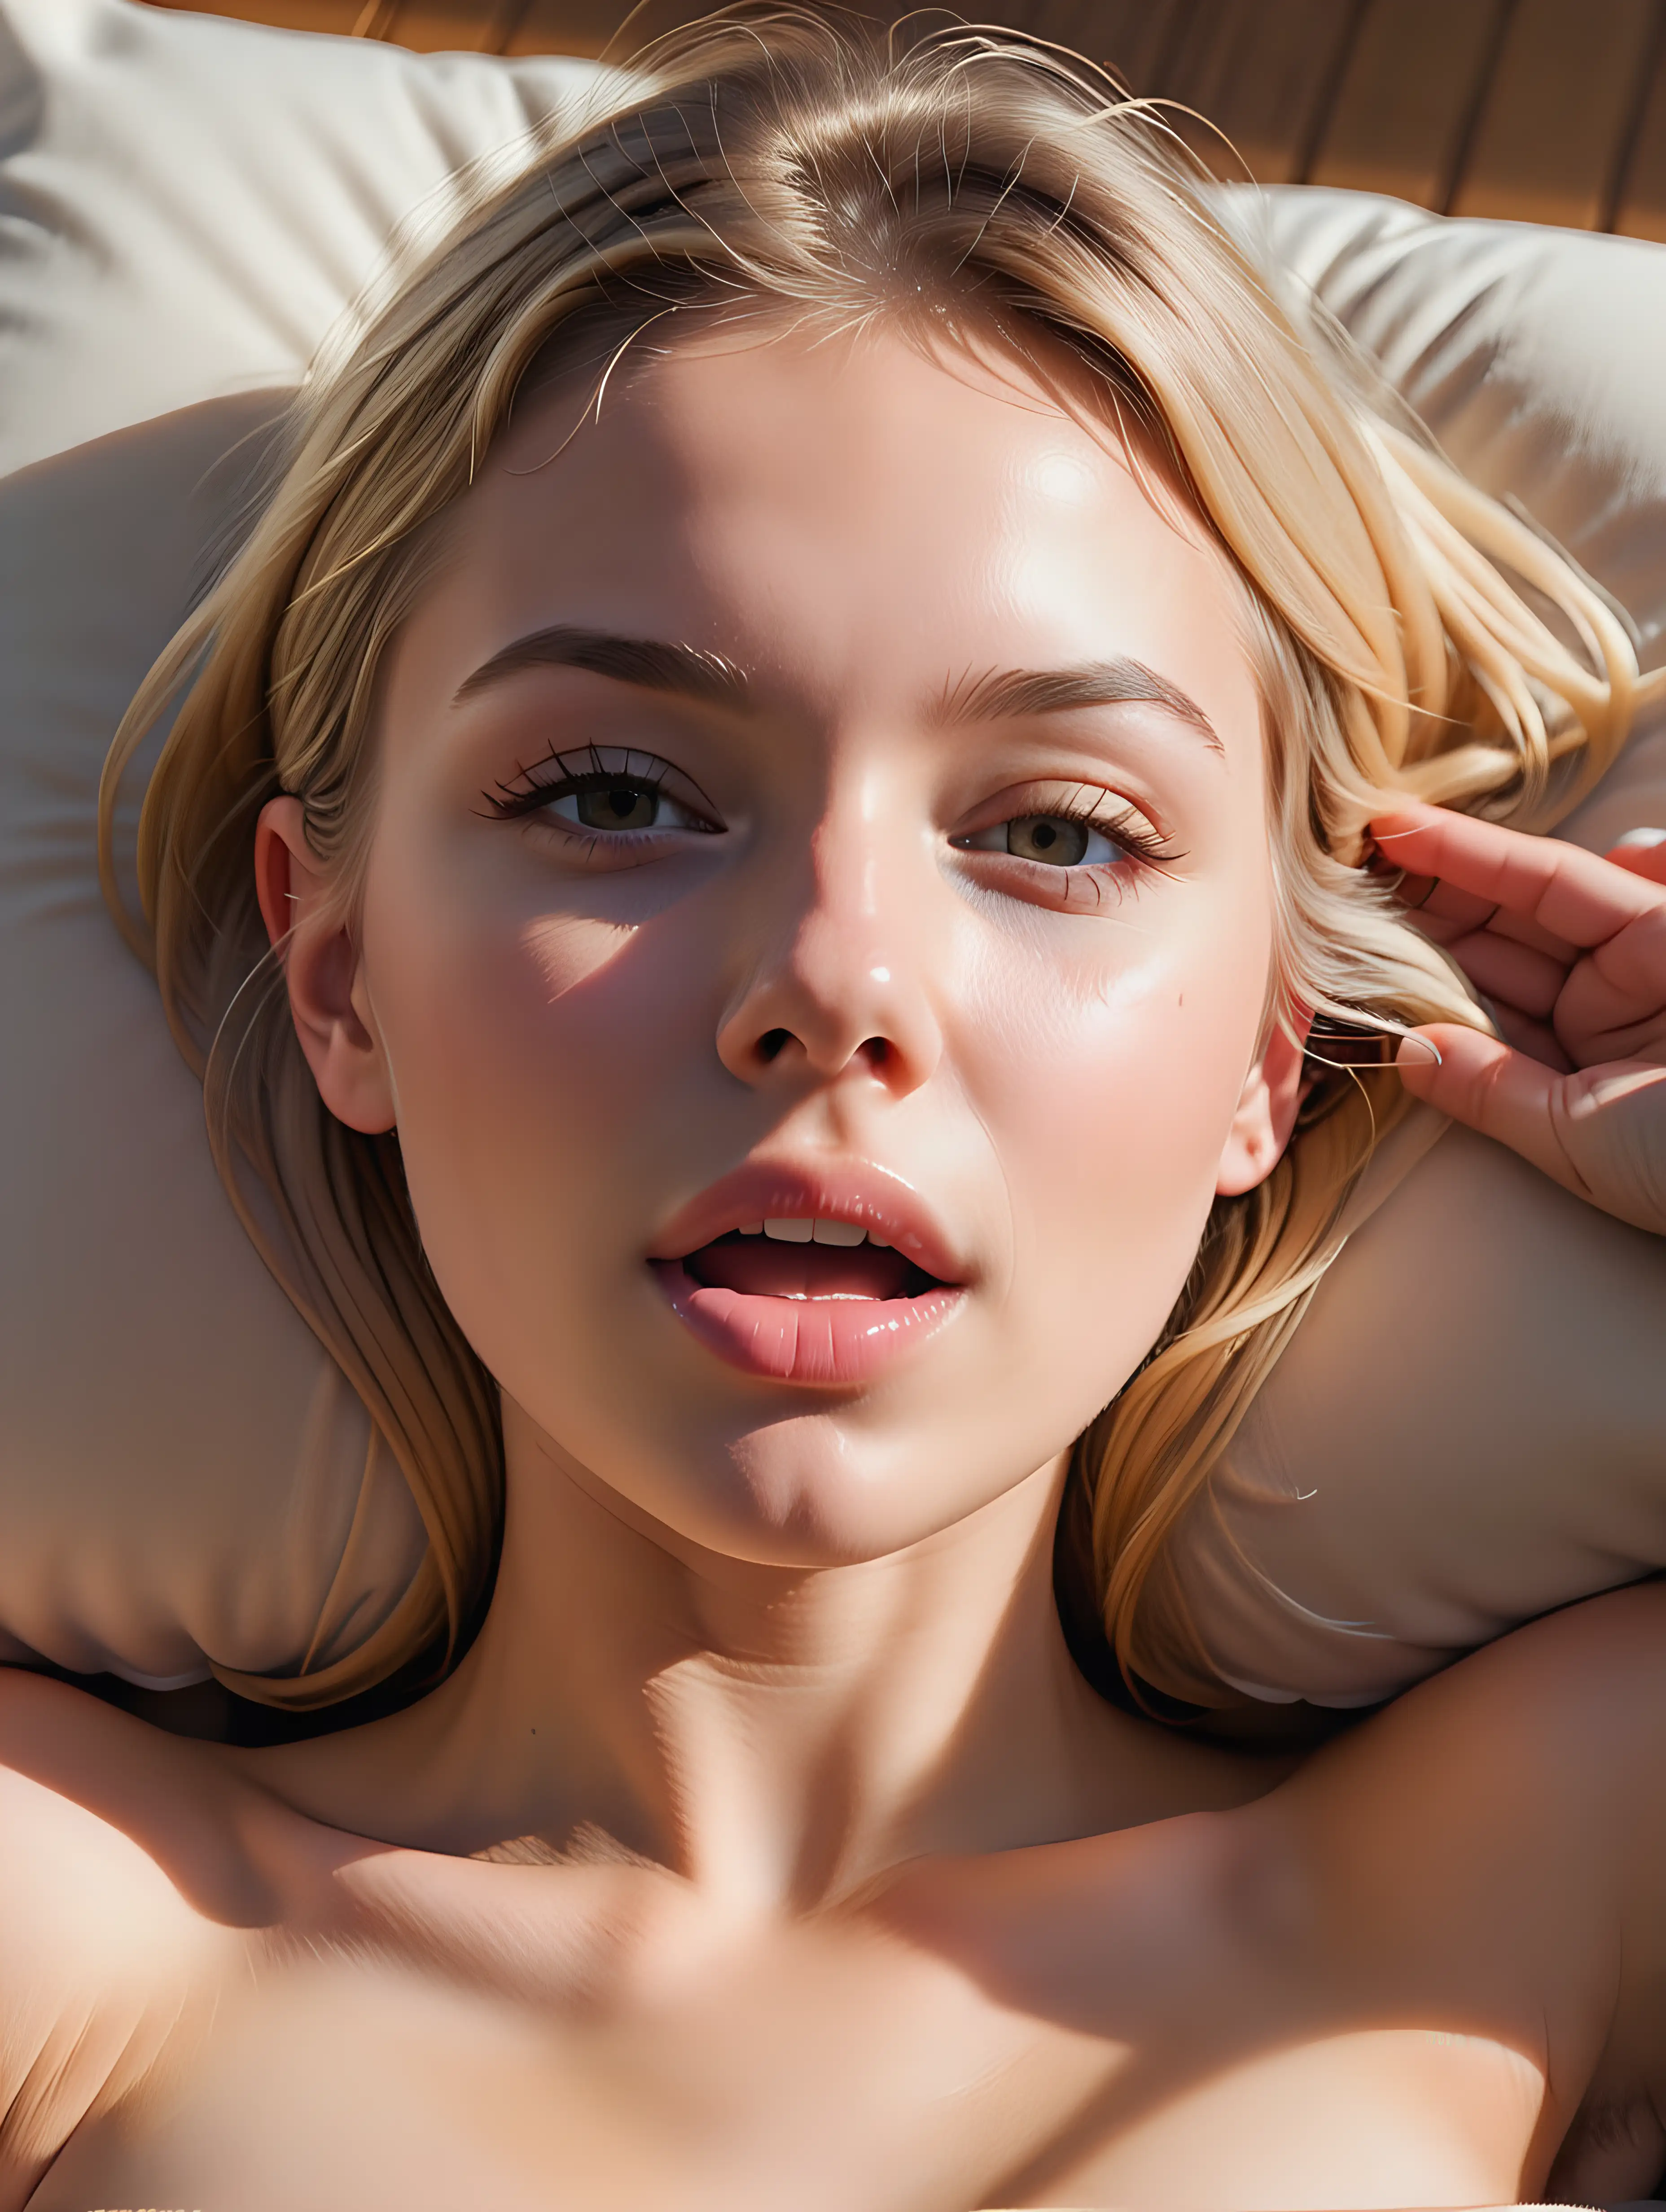 naked 20 year old blonde woman close-up of her mouth slightly open afternoon sun laying on pillow